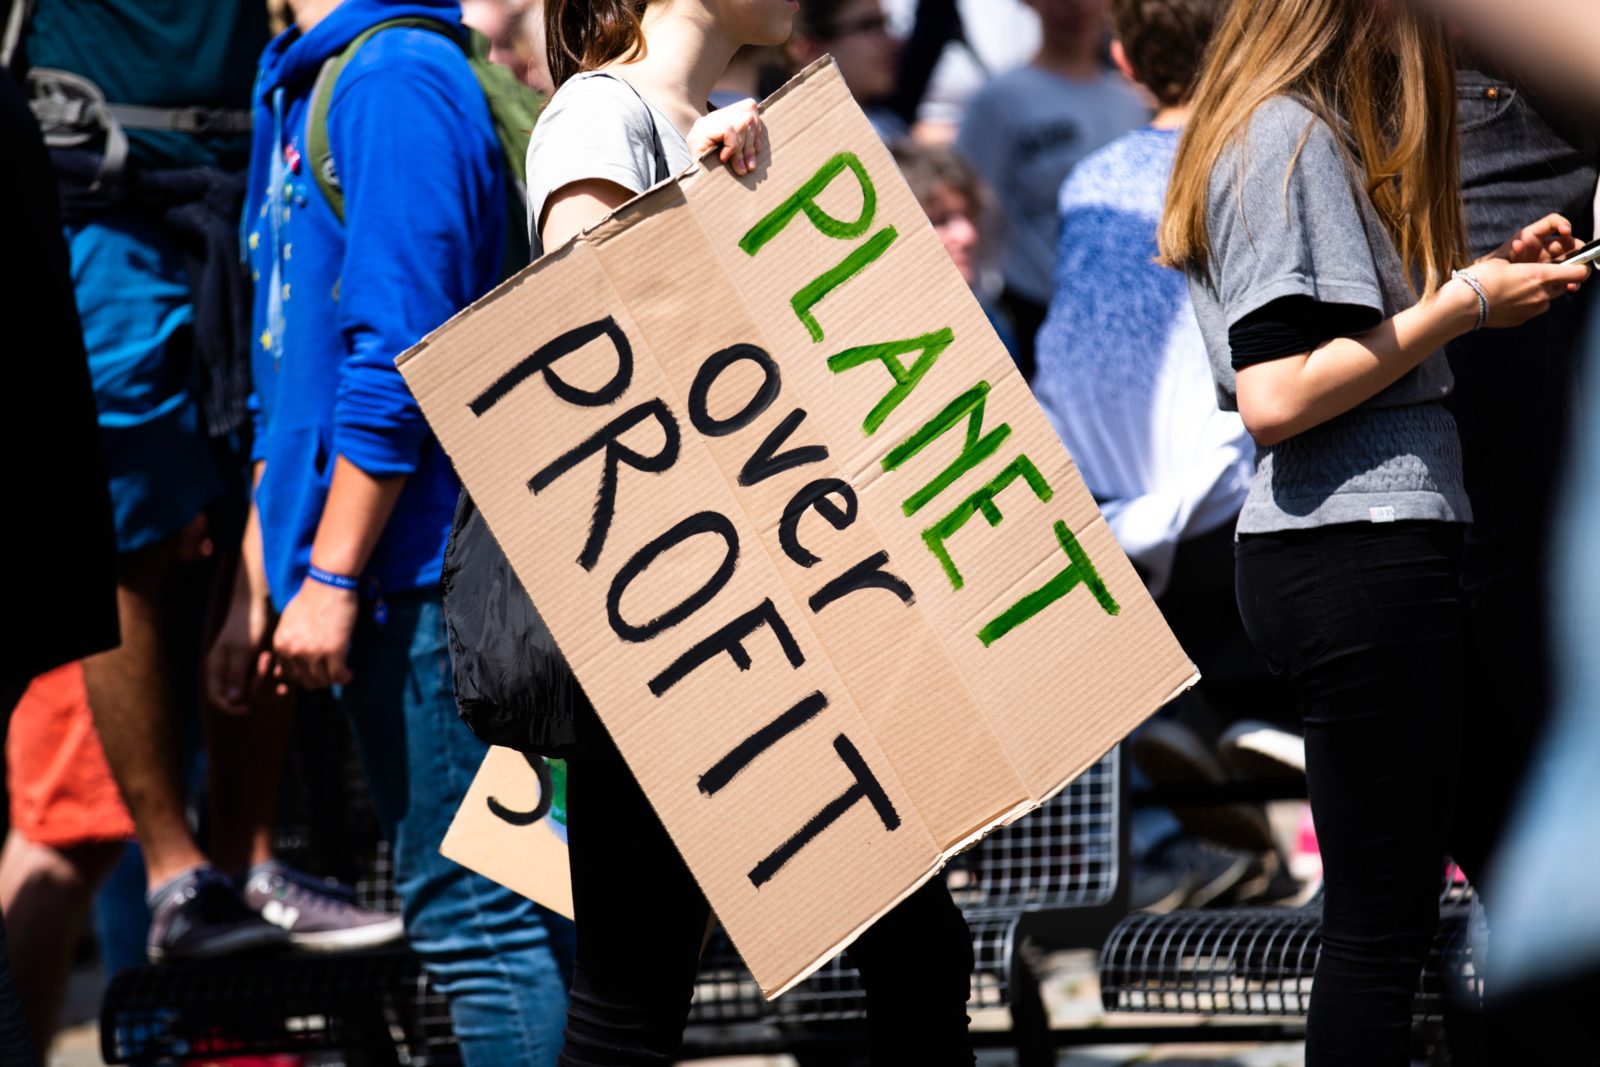 Eco friendly marketing. A group of environmental protesters, one carrying a cardboard sign reading, “Planet over Profit”.